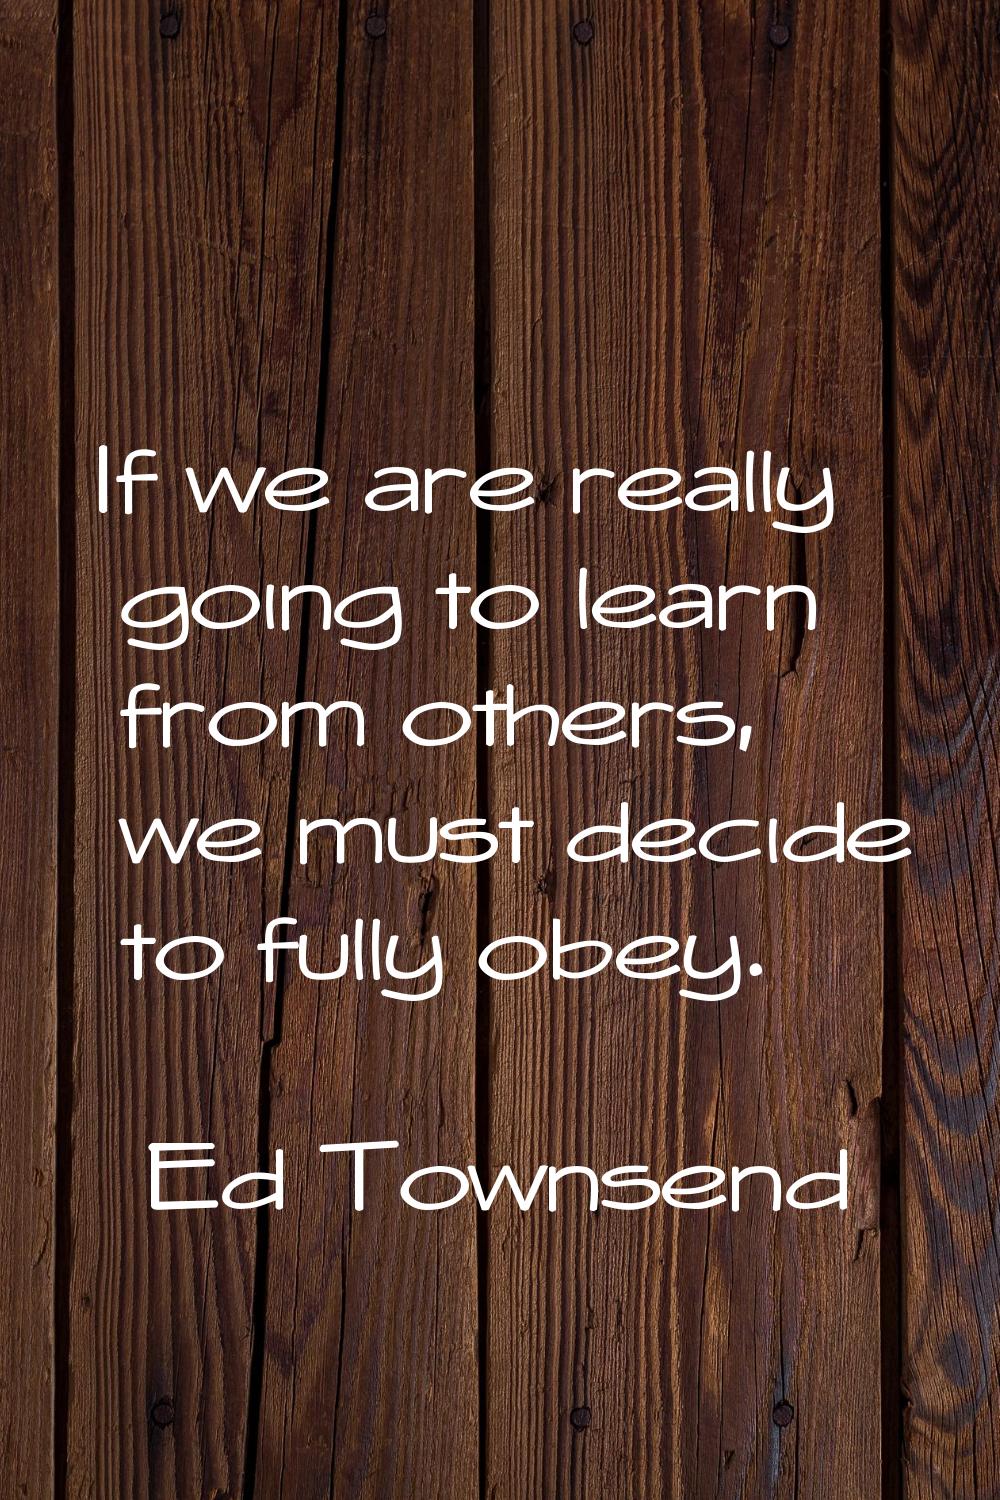 If we are really going to learn from others, we must decide to fully obey.